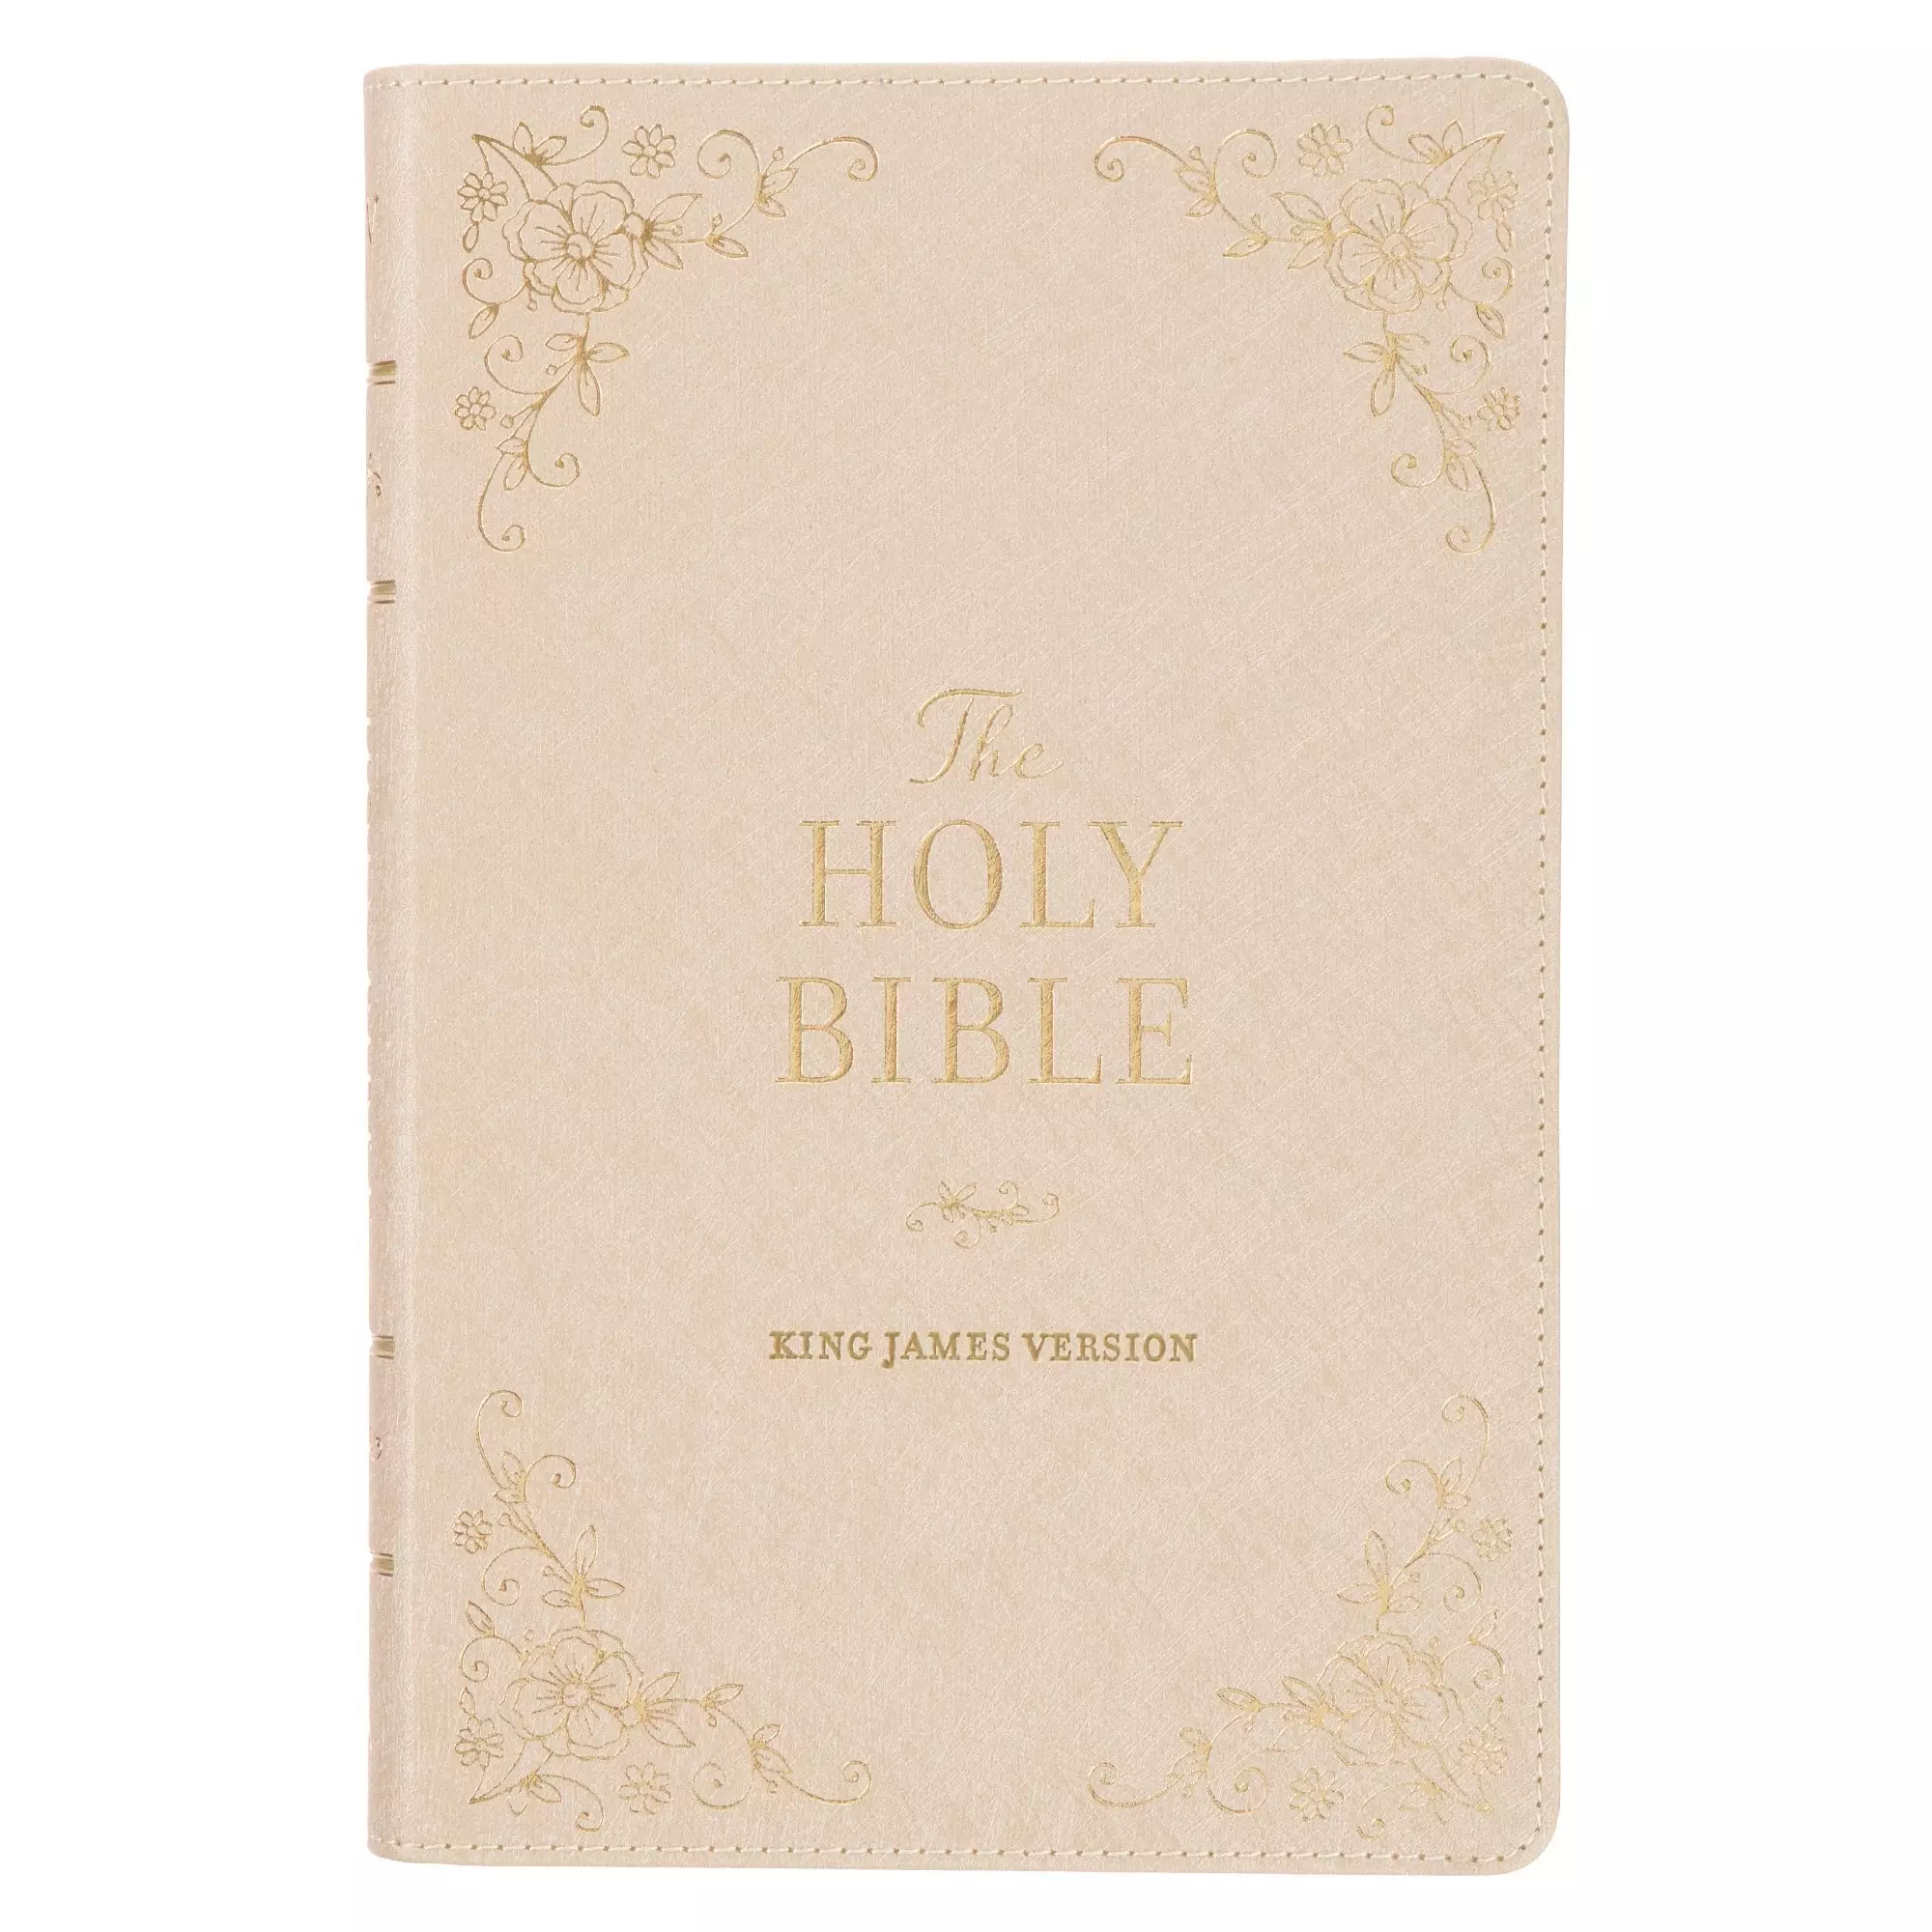 KJV Holy Bible, Standard Size Faux Leather Red Letter Edition - Thumb Index & Ribbon Marker, King James Version, Pearlescent Taupe